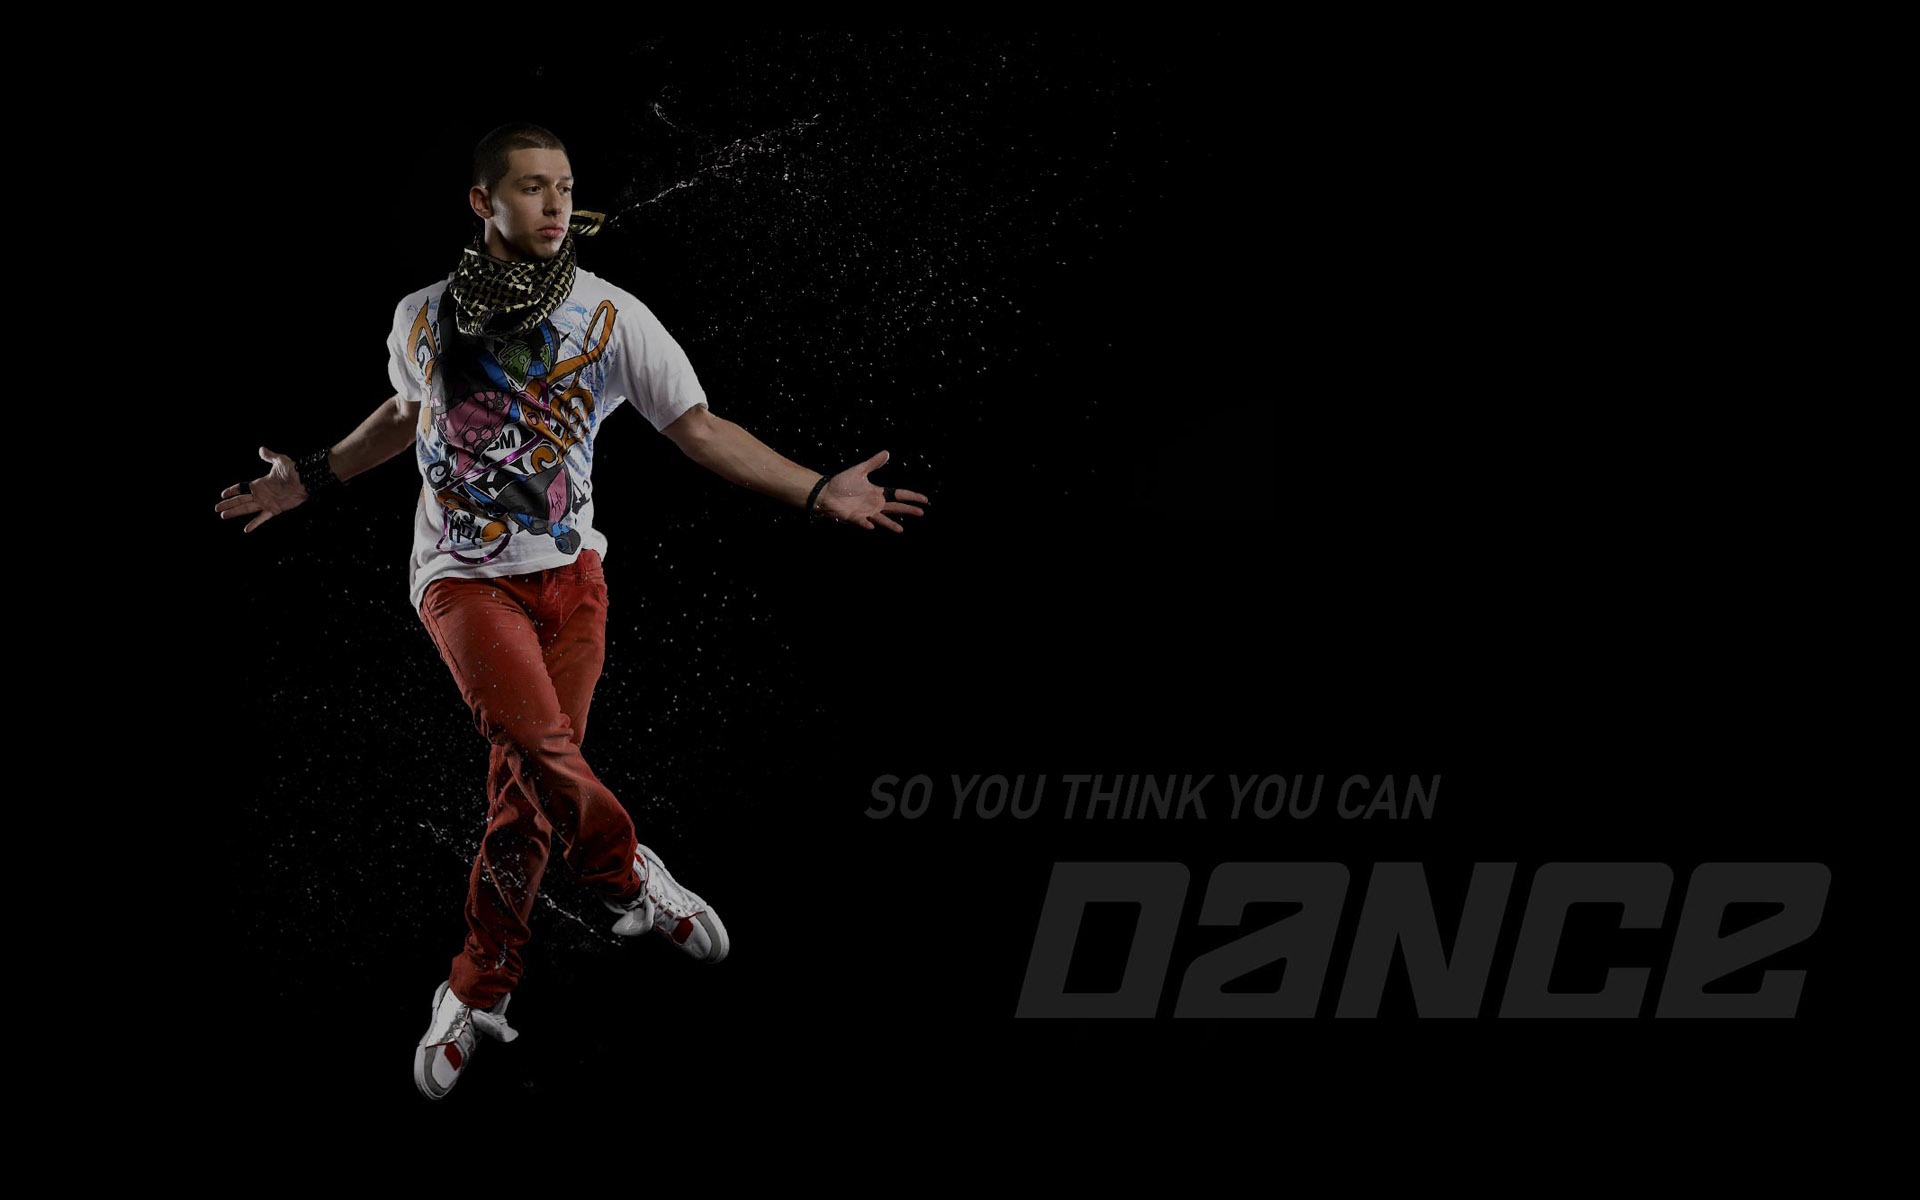 So You Think You Can Dance Wallpaper (1) #16 - 1920x1200